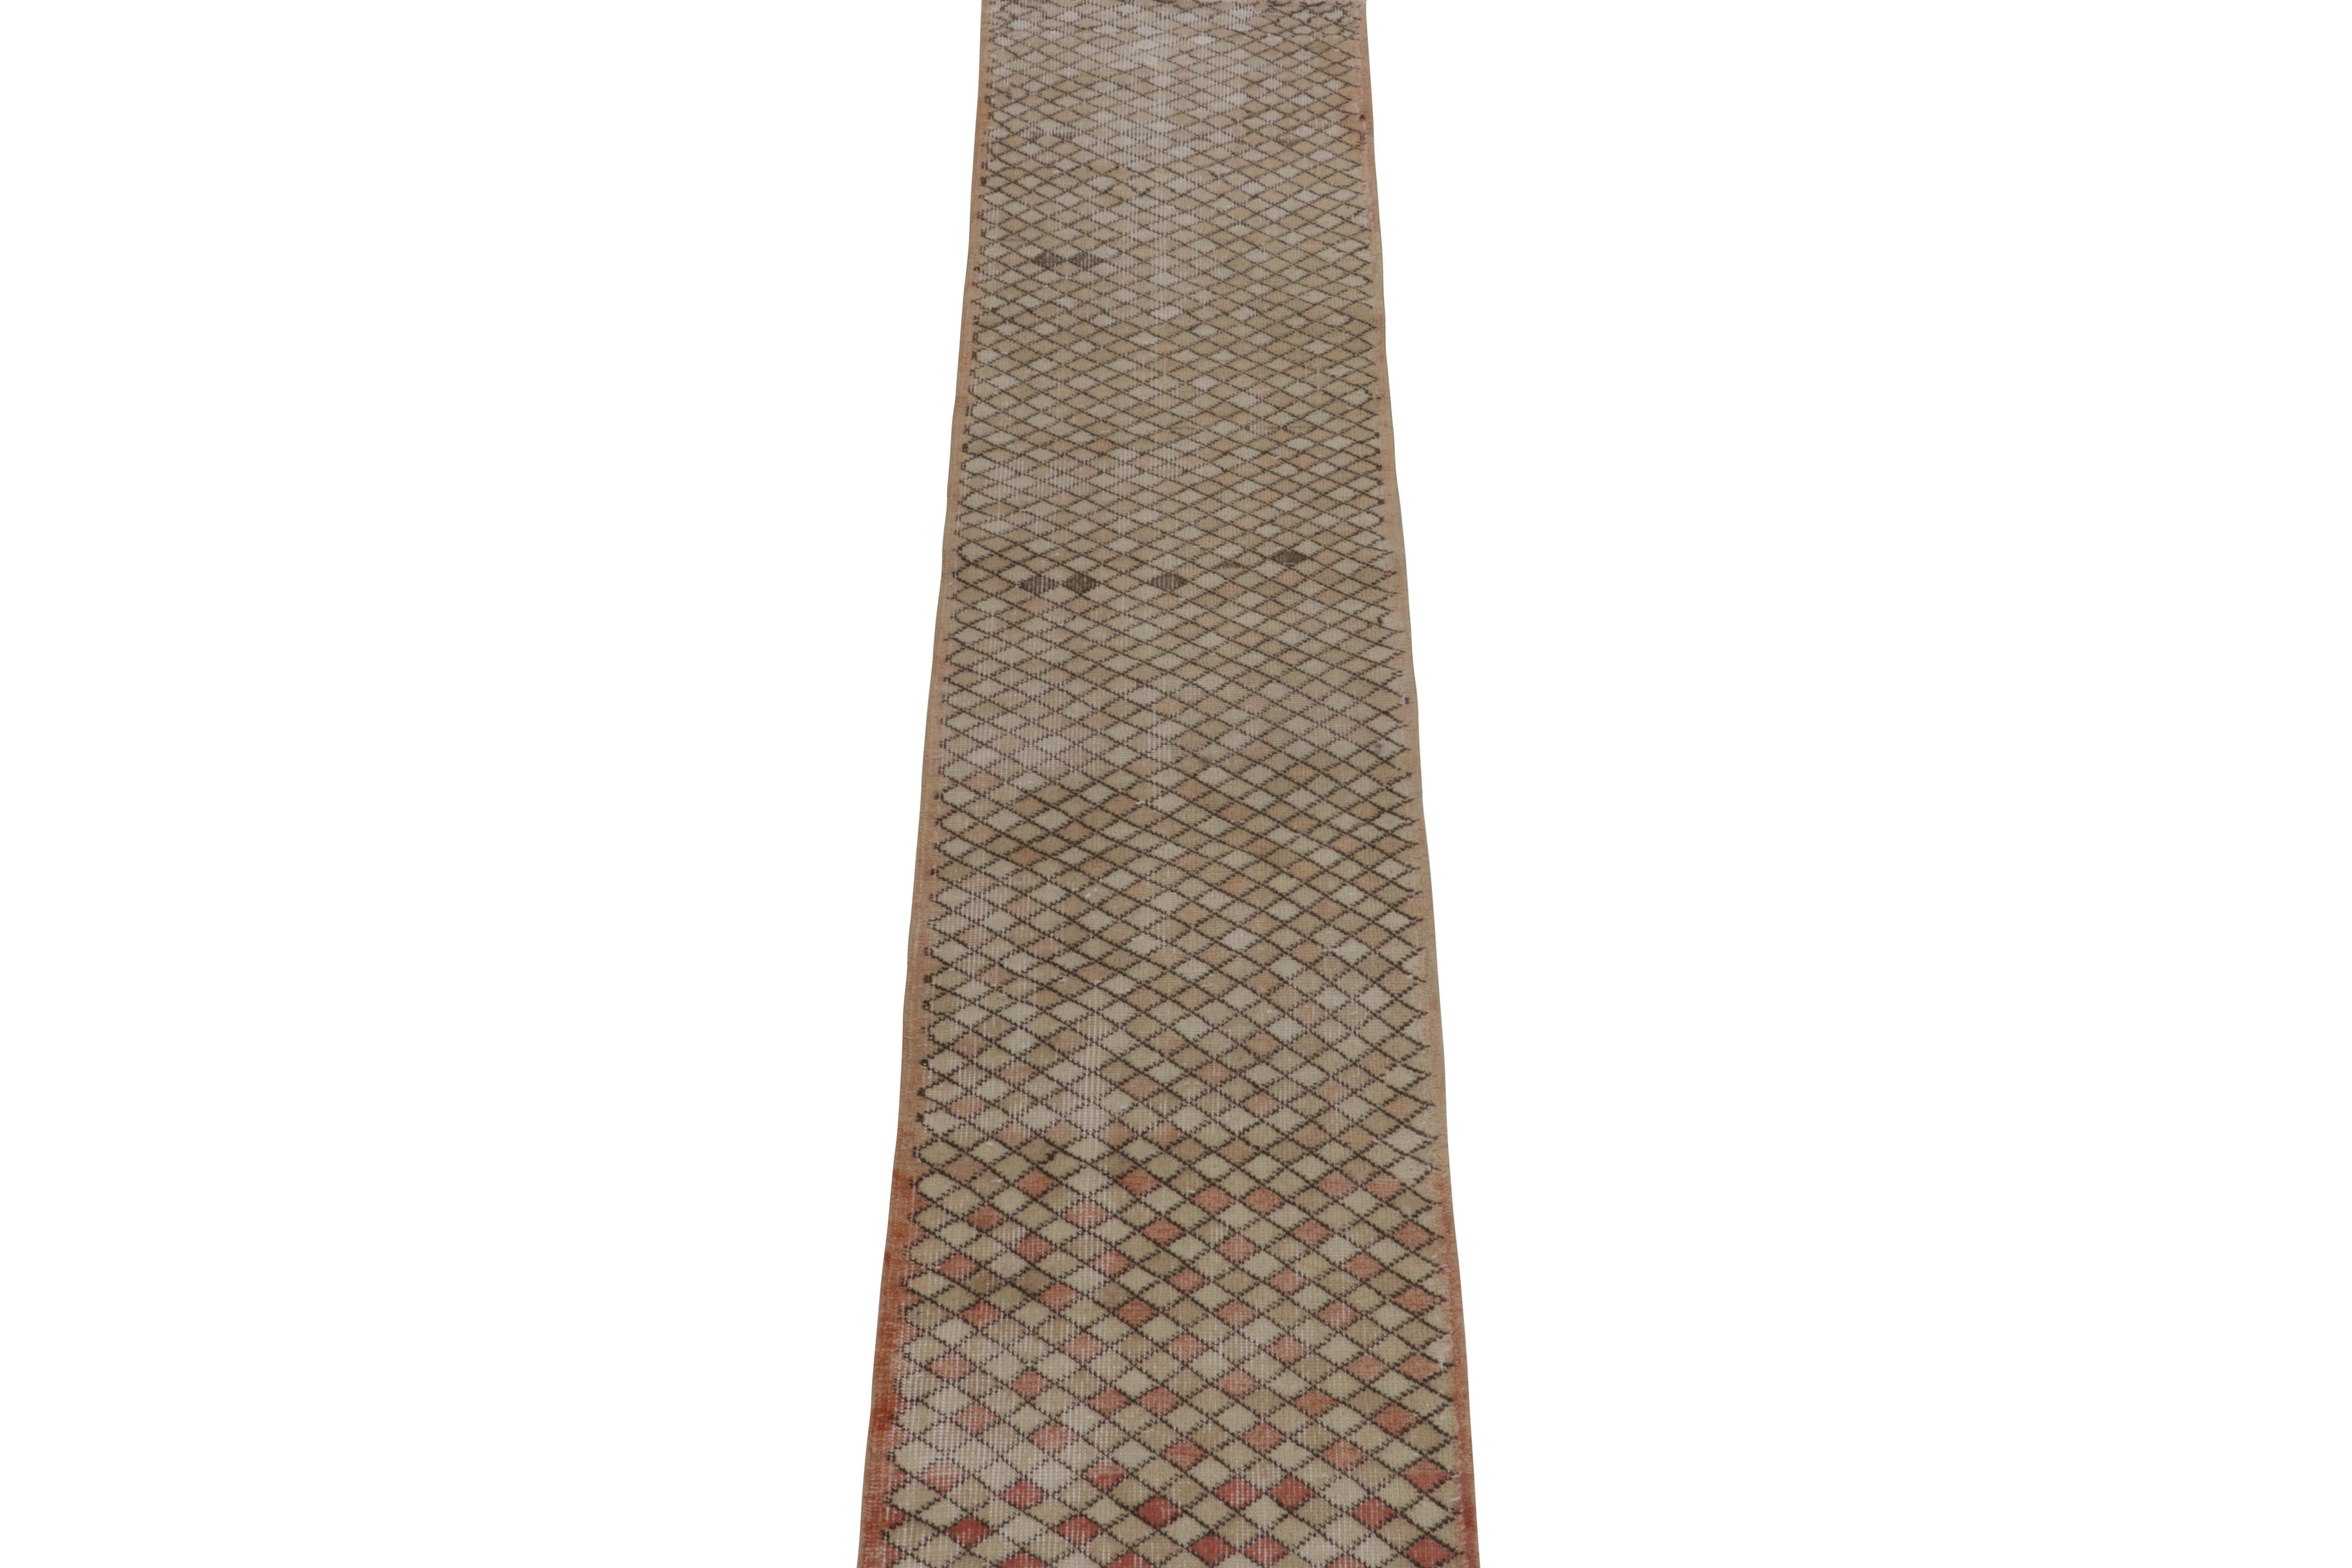 This vintage 2x8 runner is a new addition to Rug & Kilim’s commemorative Mid-Century Pasha Collection. This line is a commemoration of rare curations we believe to hail from multidisciplinary Turkish designer Zeki Müren.

Further on the